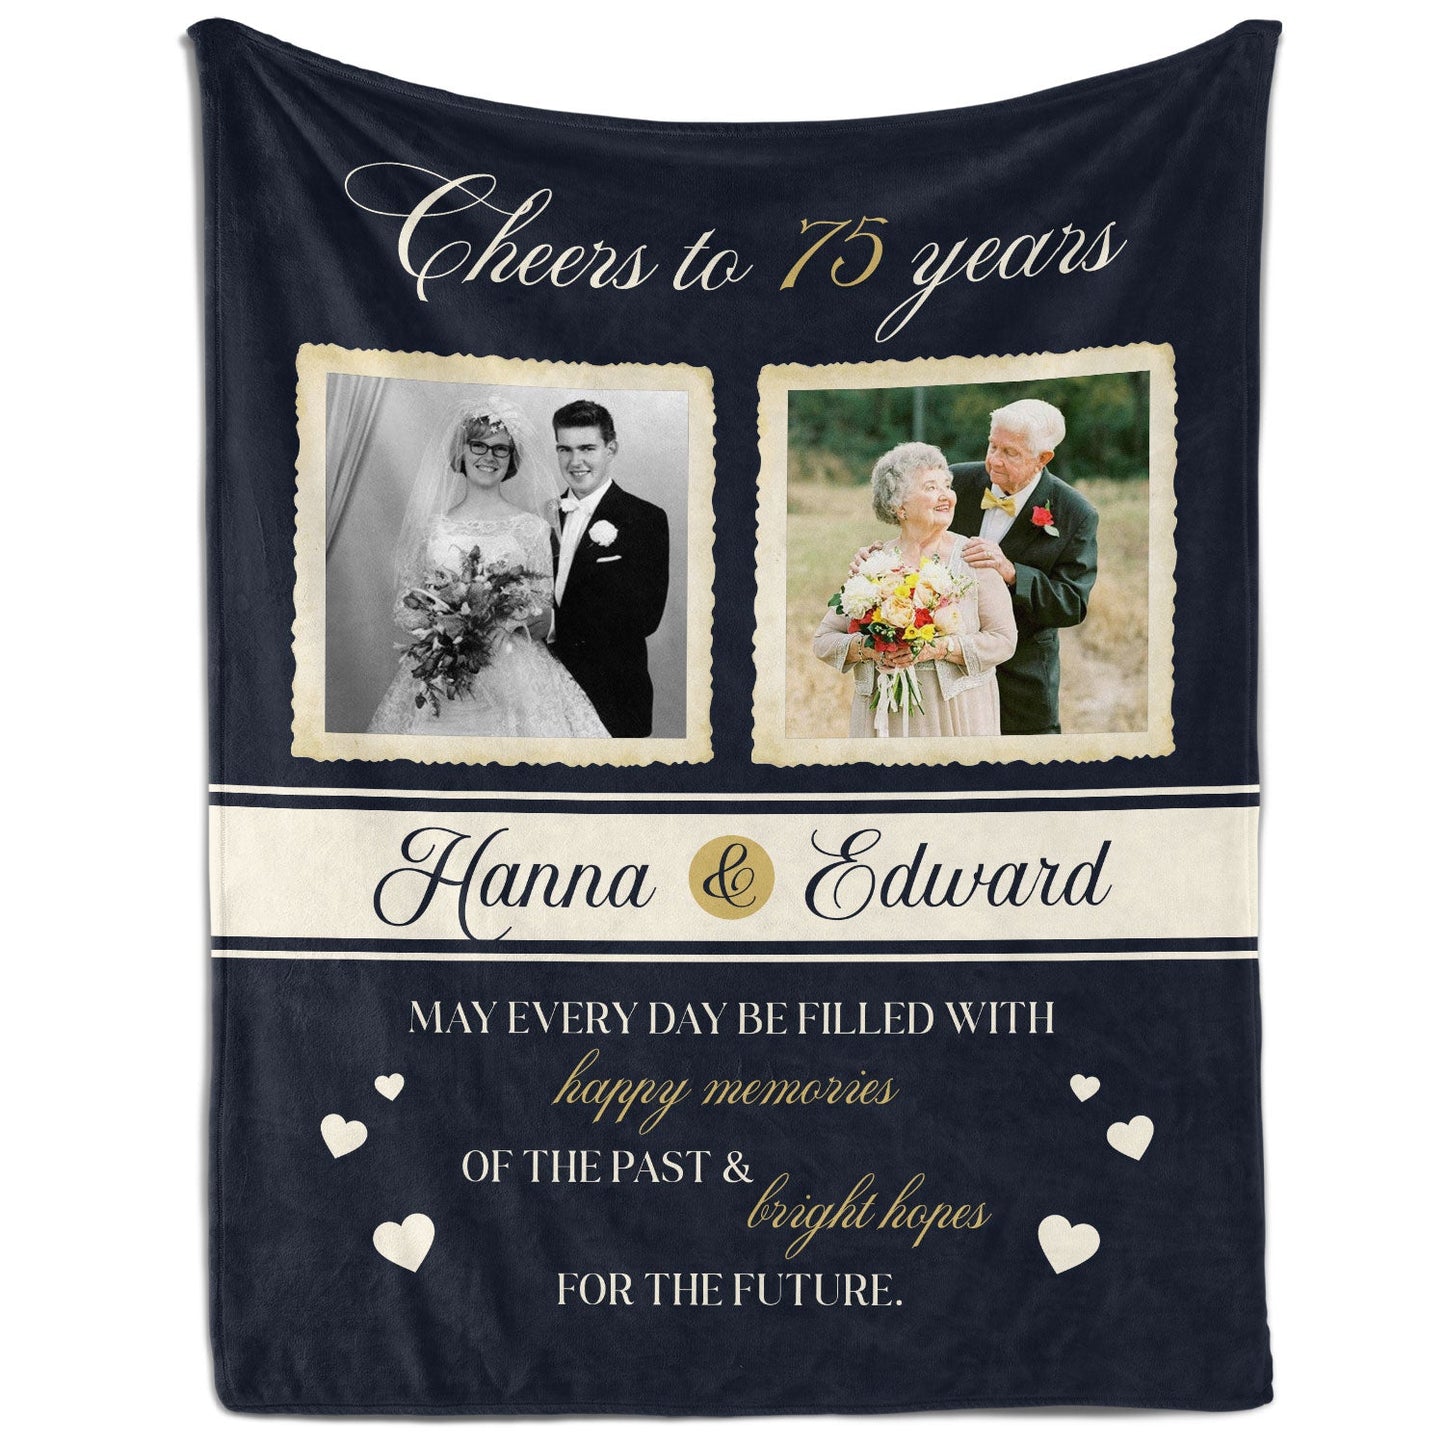 Cheers to 75 Years - Personalized 75 Year Anniversary gift For Parents or Grandparents - Custom Blanket - MyMindfulGifts